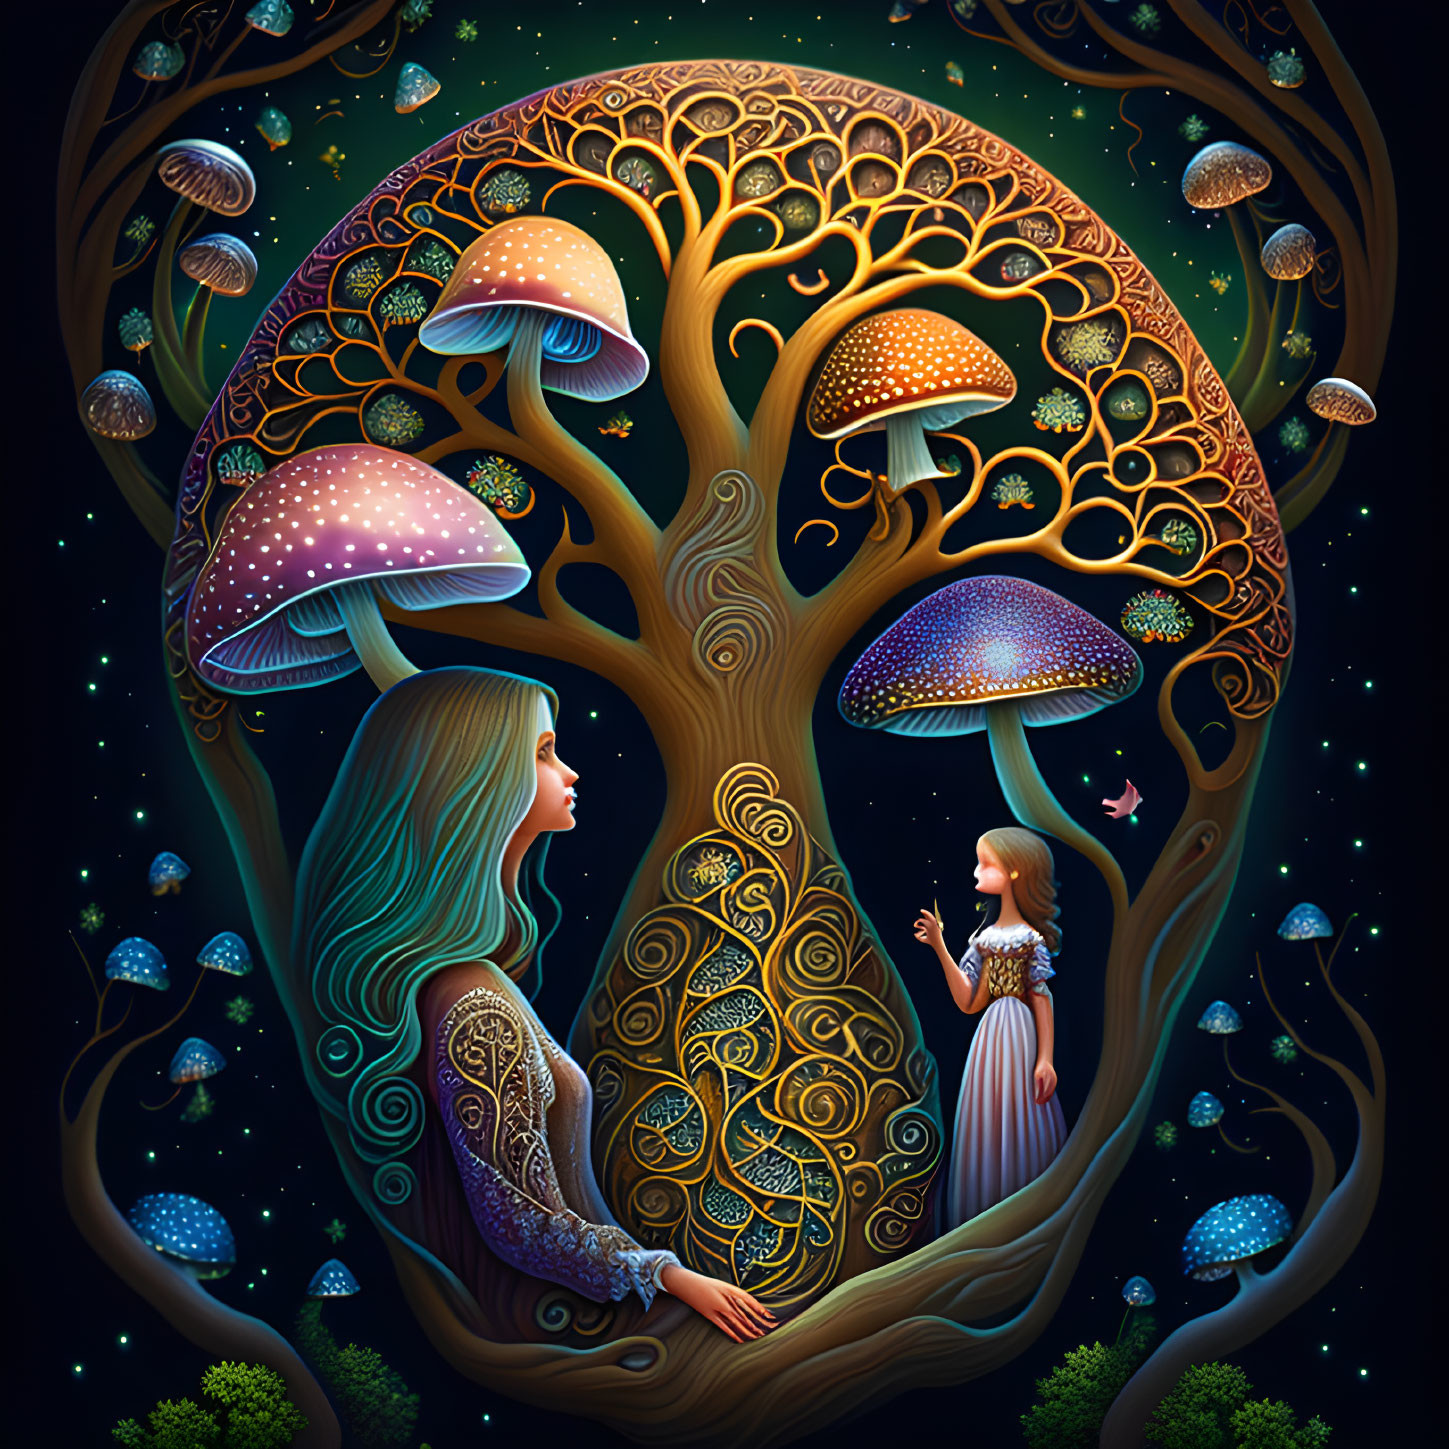 Illustration of glowing mushroom tree with woman and girl under stars